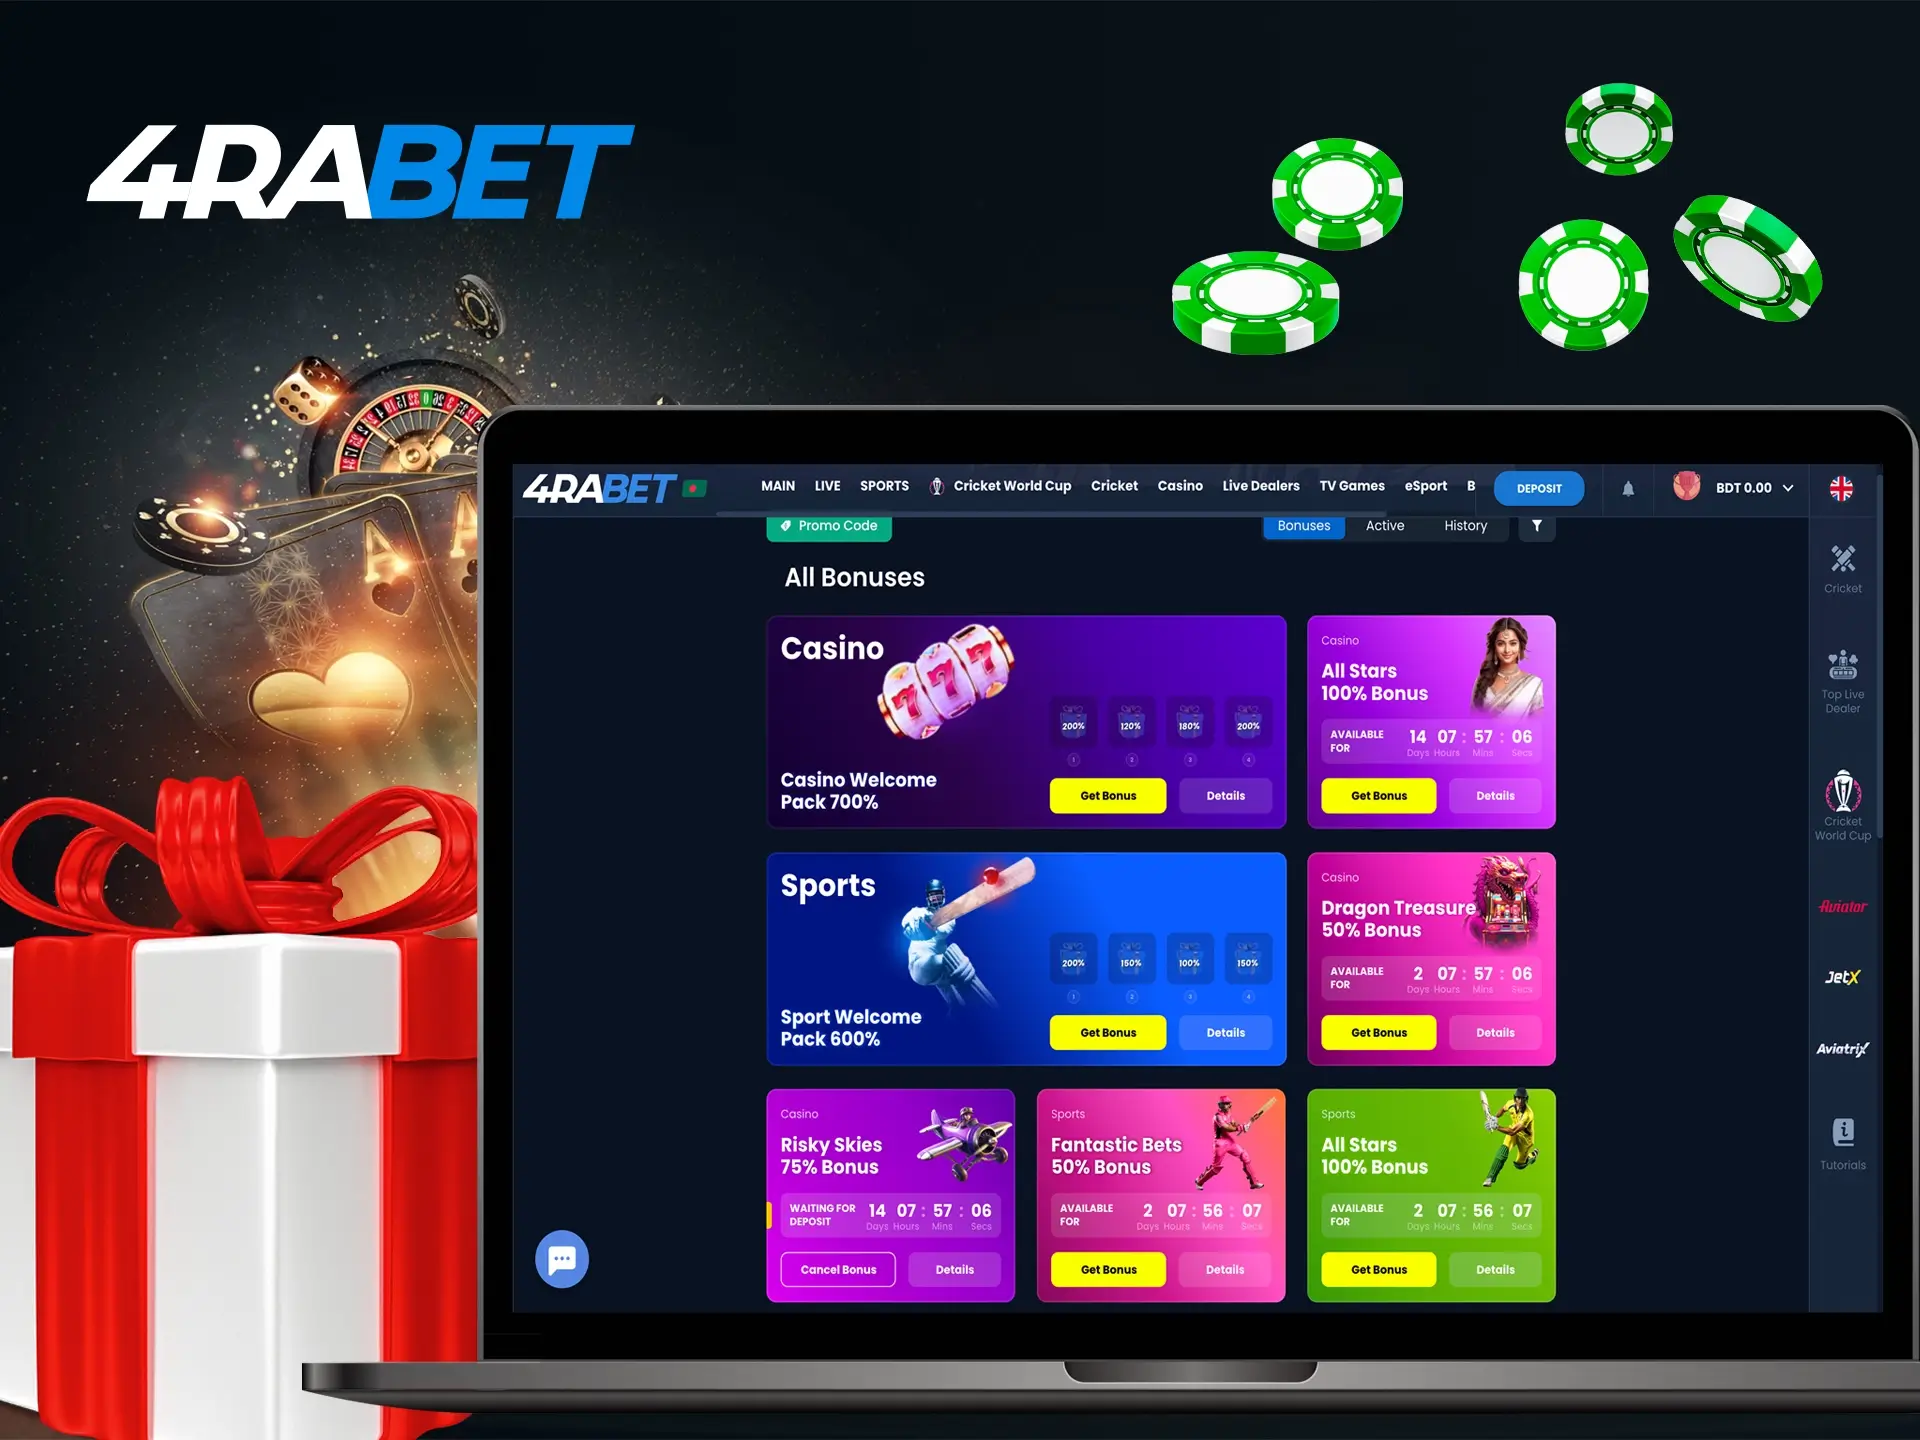 Choosing 4rabet you get a quality casino with a full system of bonuses and promotions, as well as reliable protection of your account and funds.